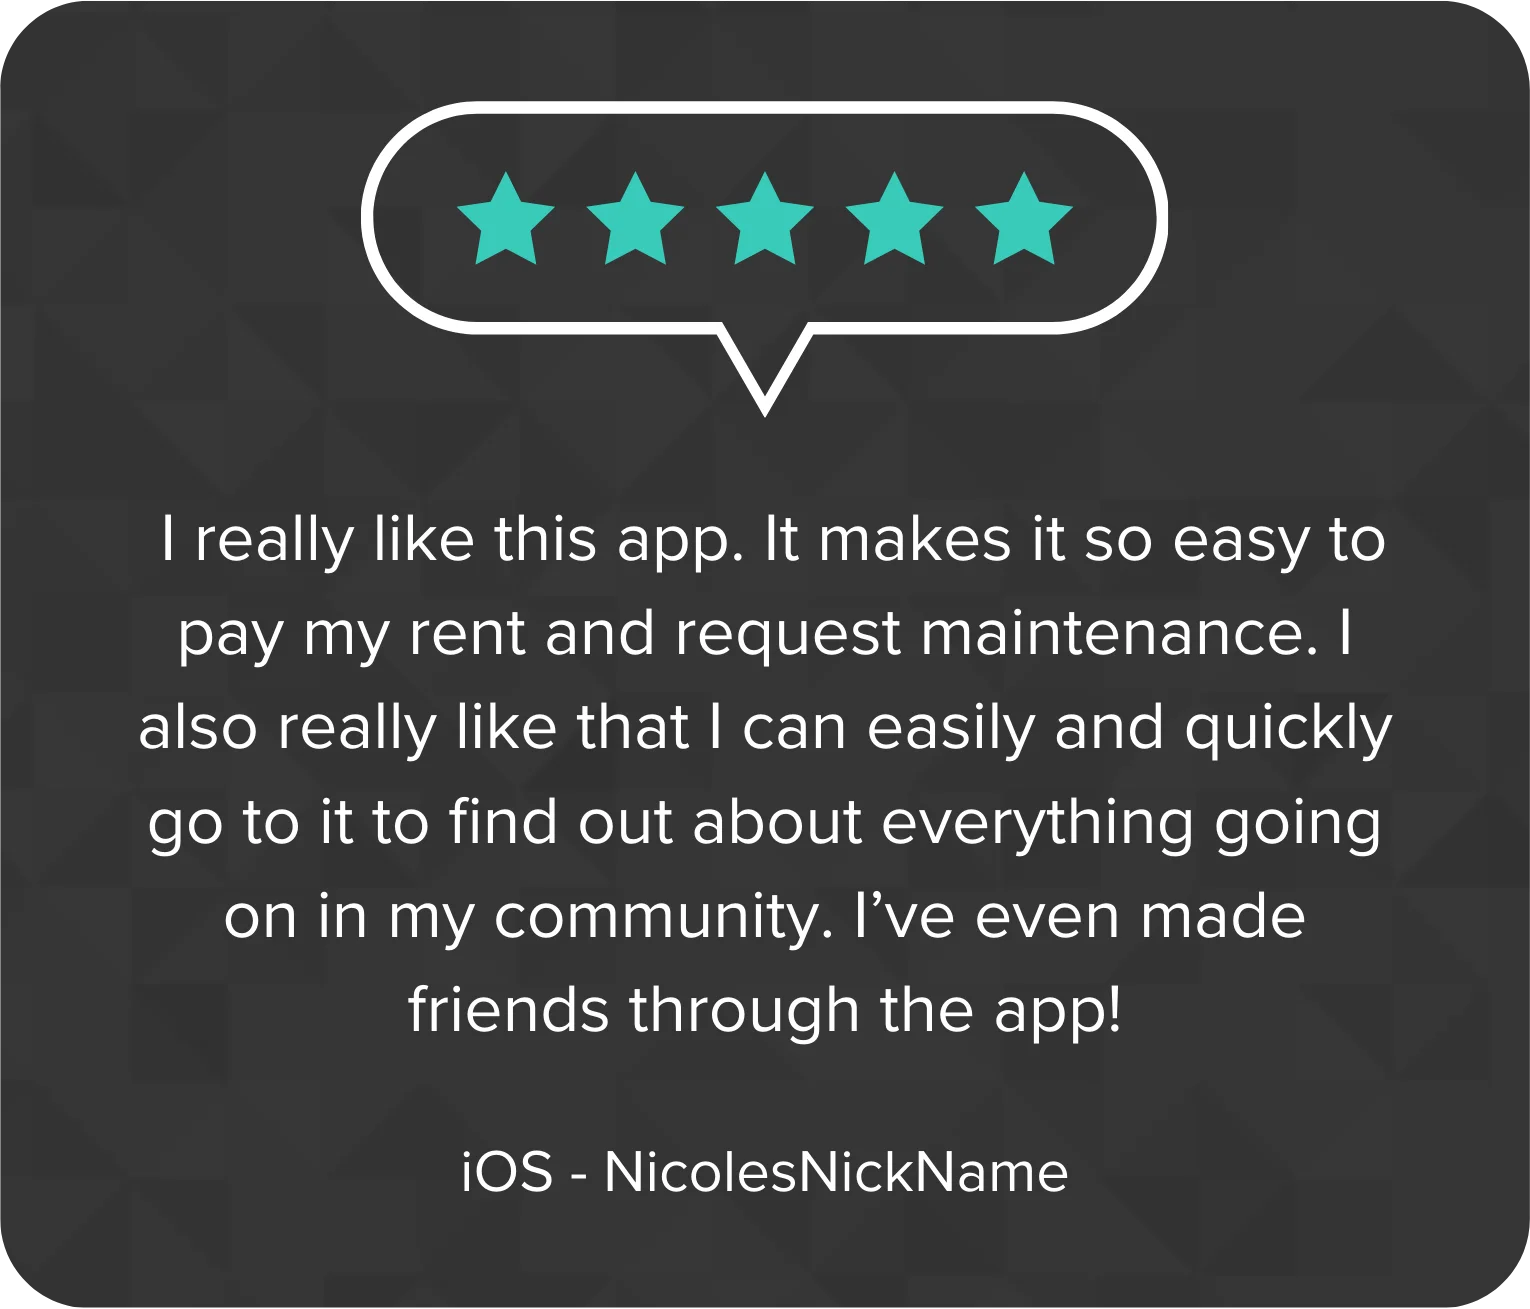 App store review from iOS user